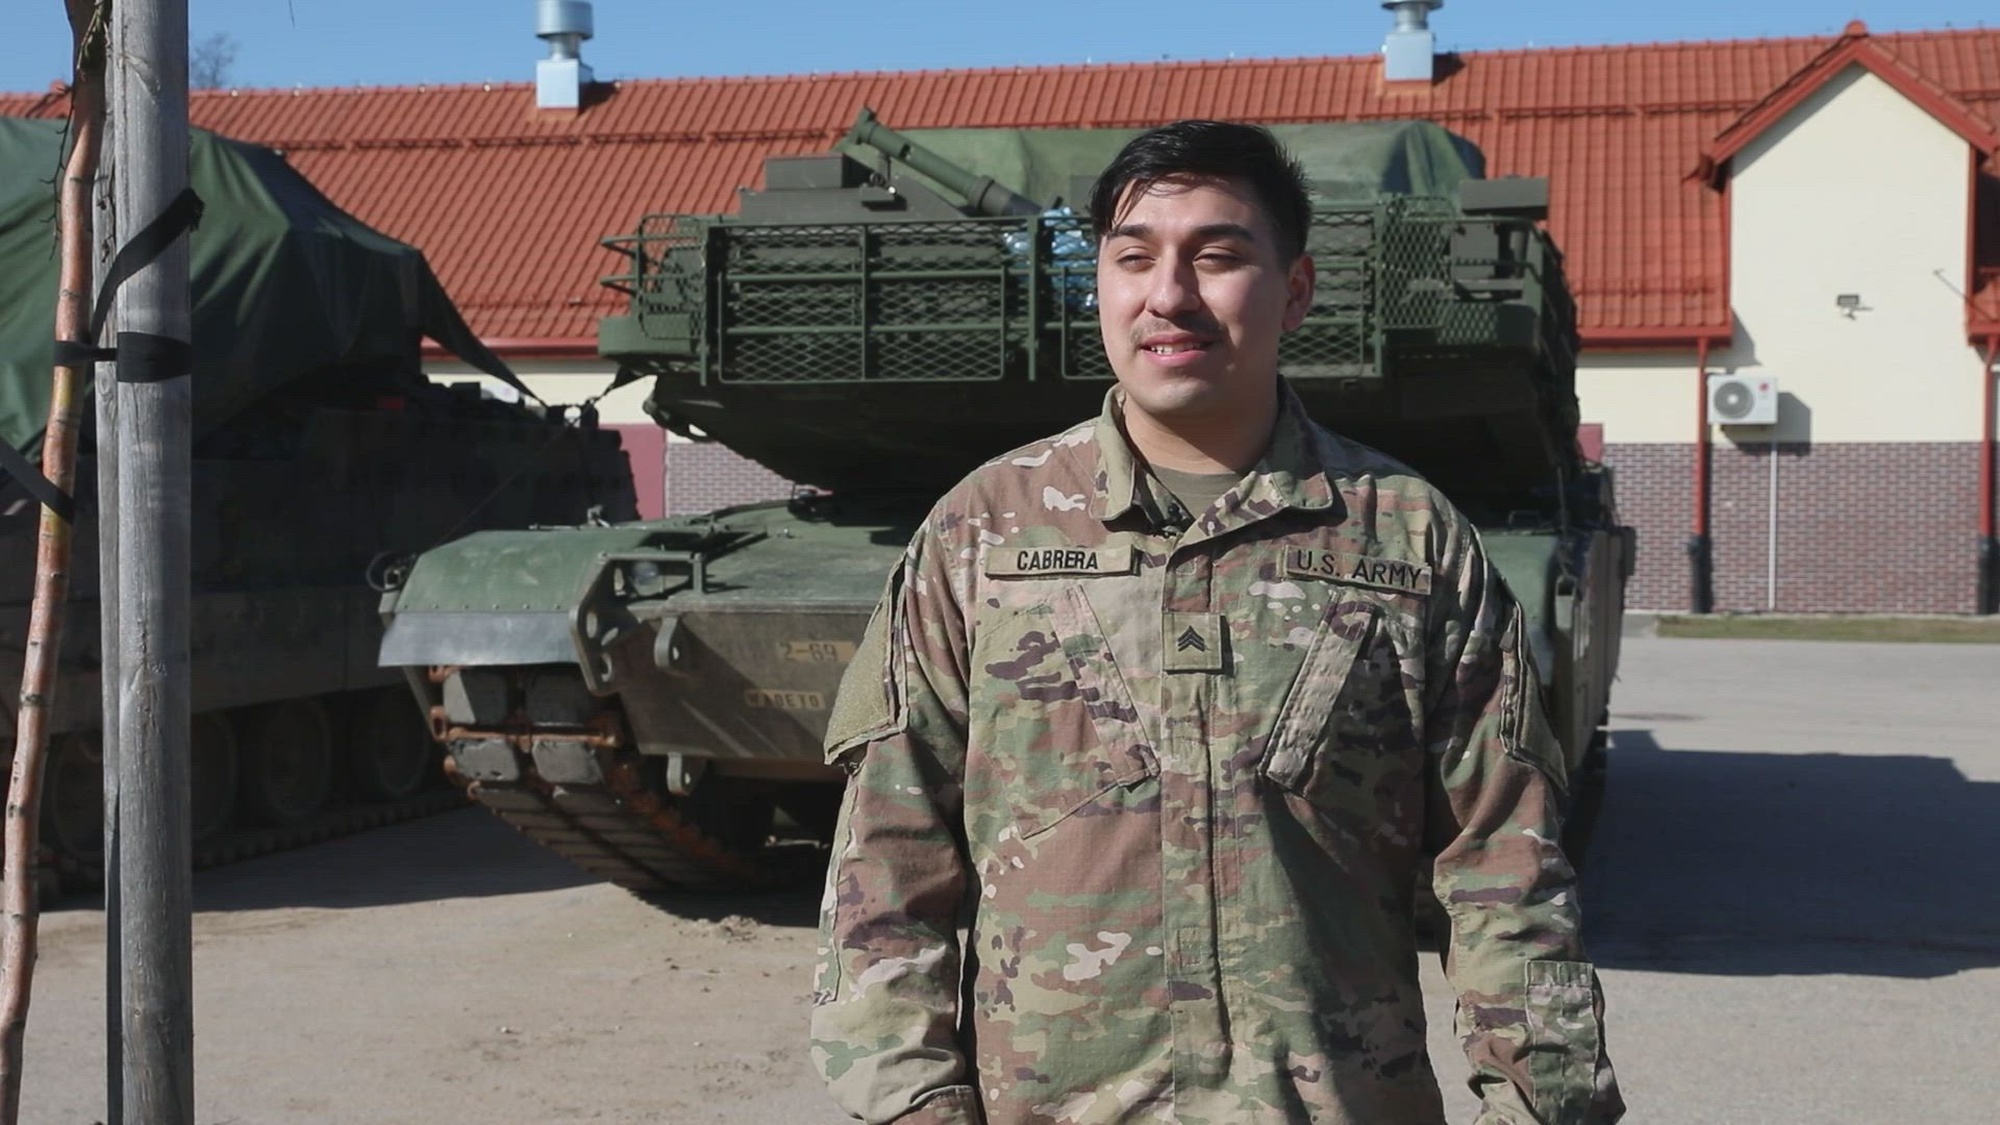 U.S. Army Sgt. Fransisco Cabrera, a M1 armor crewman assigned to Alpha Company, 2nd Battalion, 69th Armor Regiment, 2nd Armored Brigade Combat Team, 3rd Infantry Division with NATO’s enhanced Forward Presence Battle Group Poland, Provides an interview for Iron Panther, a physical training competition with NATO allies at Bemowo Piskie Training Area, Poland, March 7, 2024. Iron Panther competition boosted morale, teamwork, and trust among NATO's enhanced Forward Presence Battle Group Poland in BPTA. The 3rd Infantry Division’s mission in Europe is to engage in multinational training and exercises across the continent, working alongside NATO allies and regional security partners to provide combat-credible forces to V Corps, America’s forward-deployed corps in Europe. 